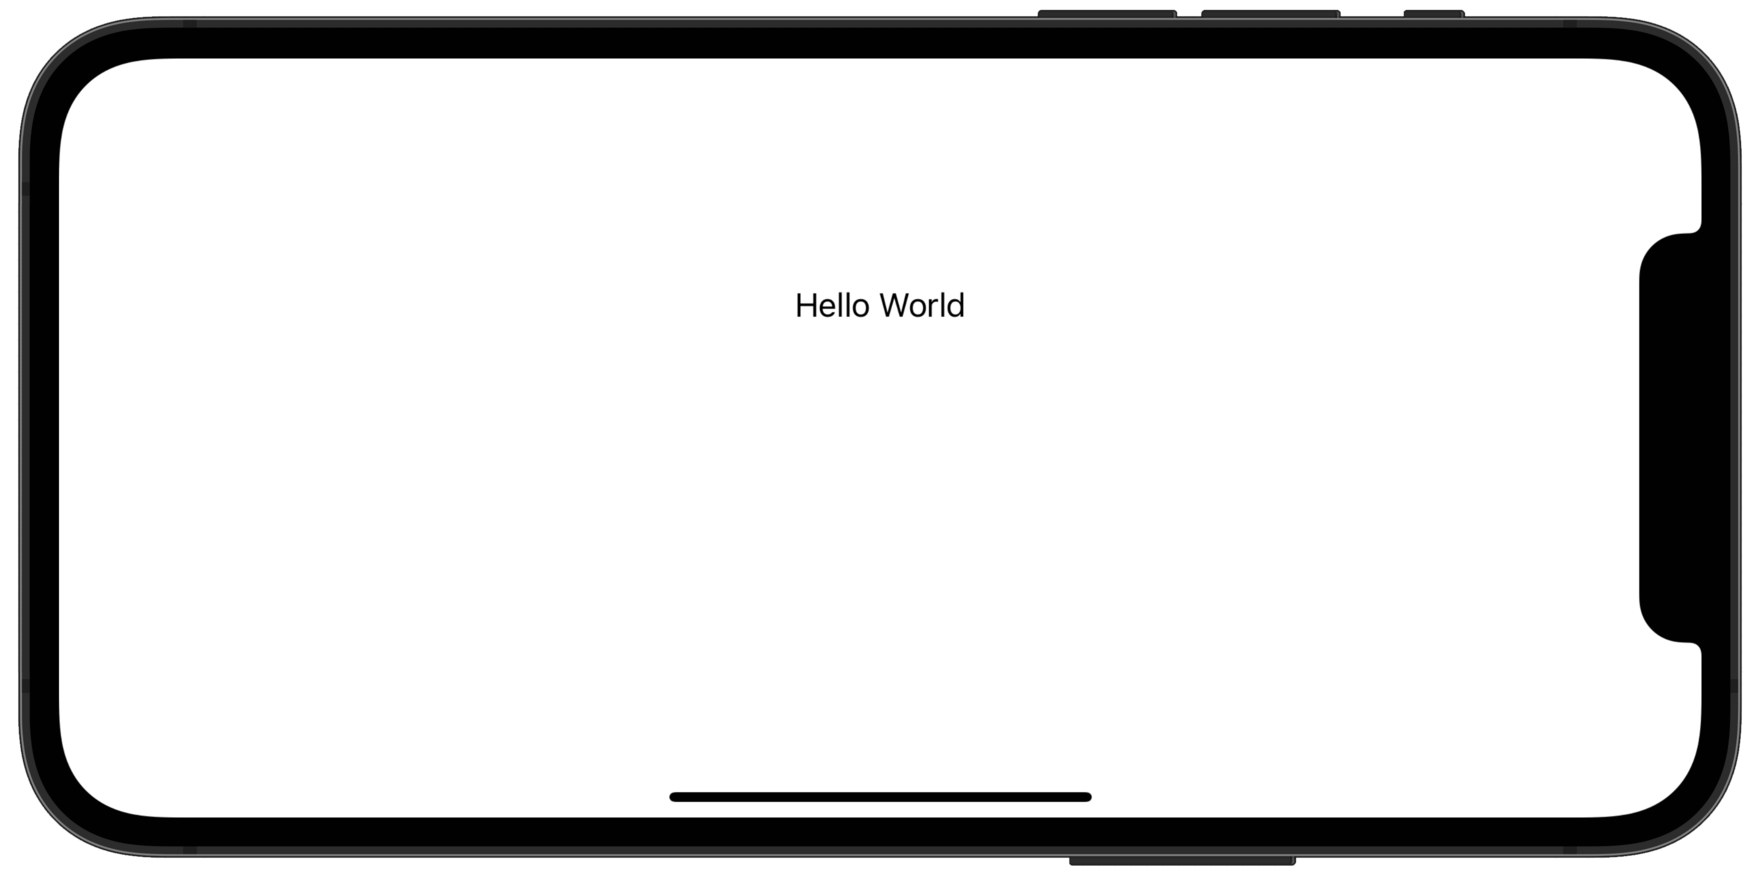 A phone with the text “Hello World” two thirds of the way up the screen.